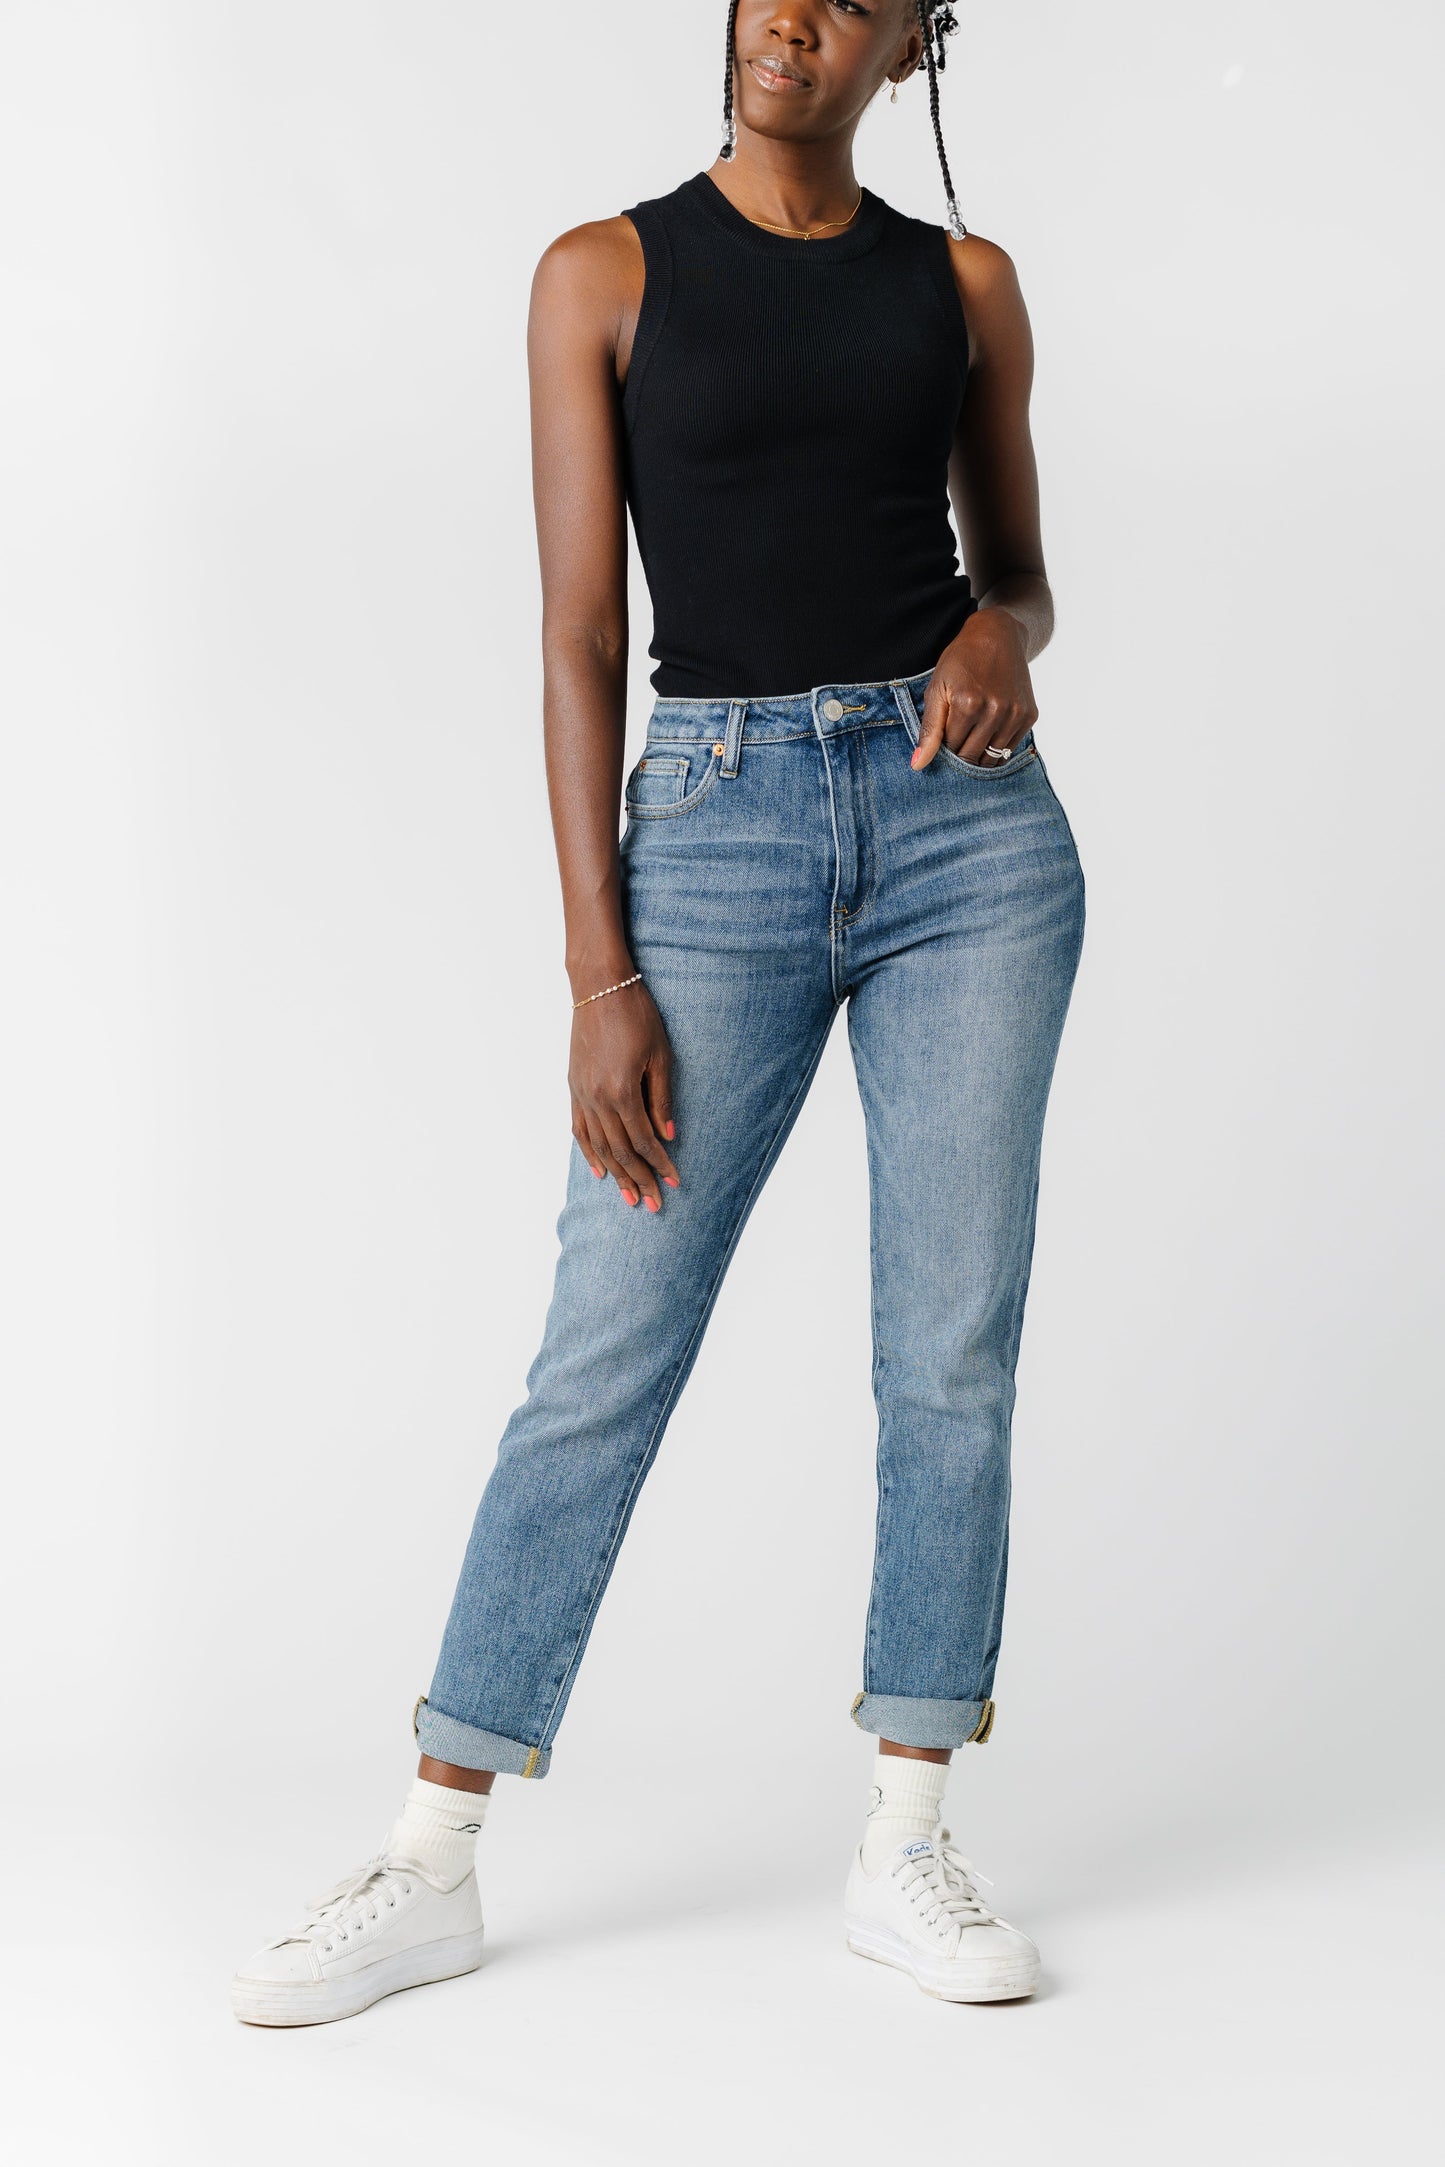 How to Style High Waisted Jeans — Jasmine Diane